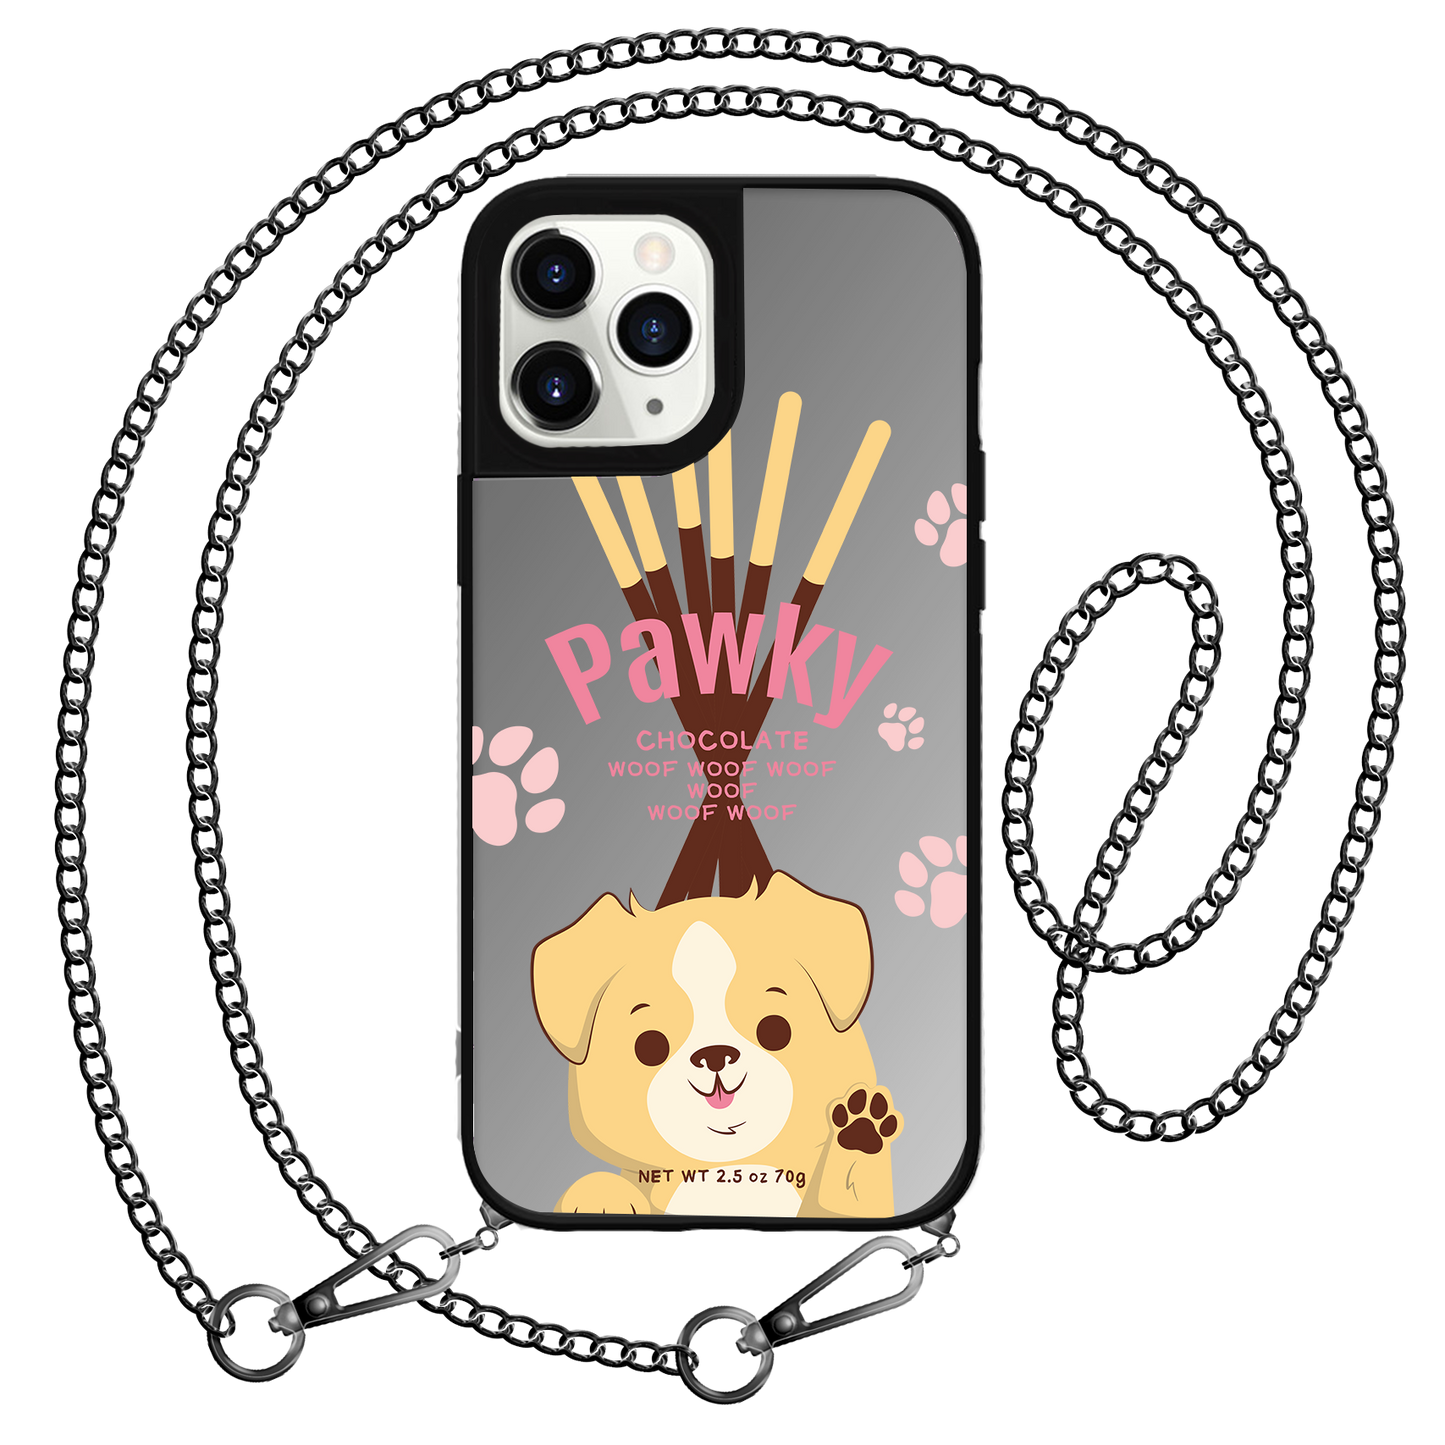 iPhone Mirror Grip Case - Pawky Dog